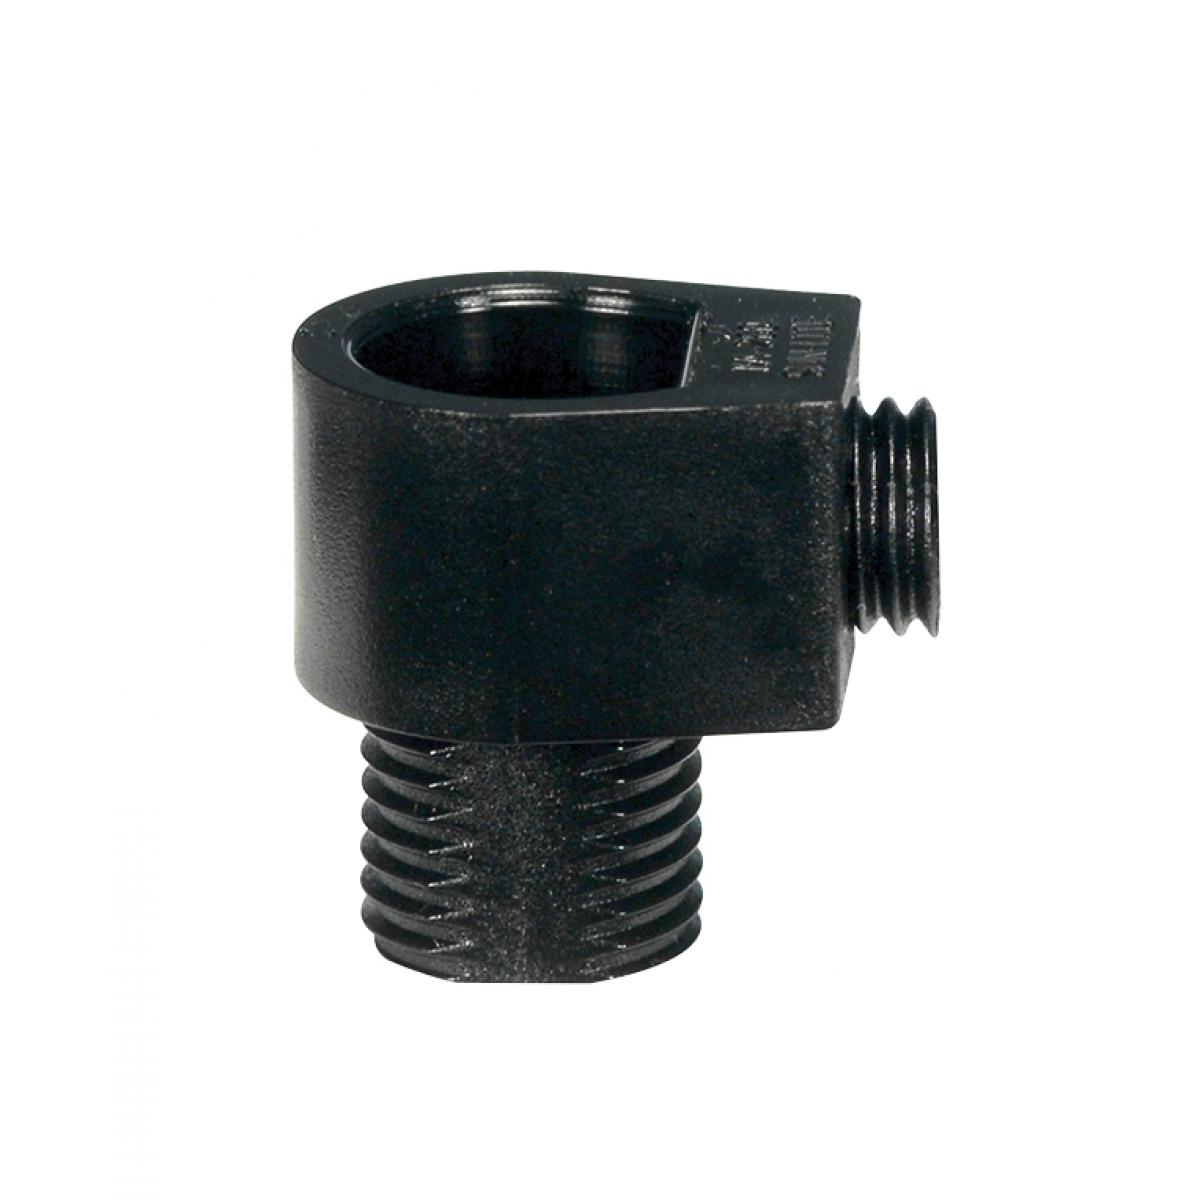 Satco 80-2338 Black 1/8 IP Strain Relief With Set Screw For 18/2 SVT Wire